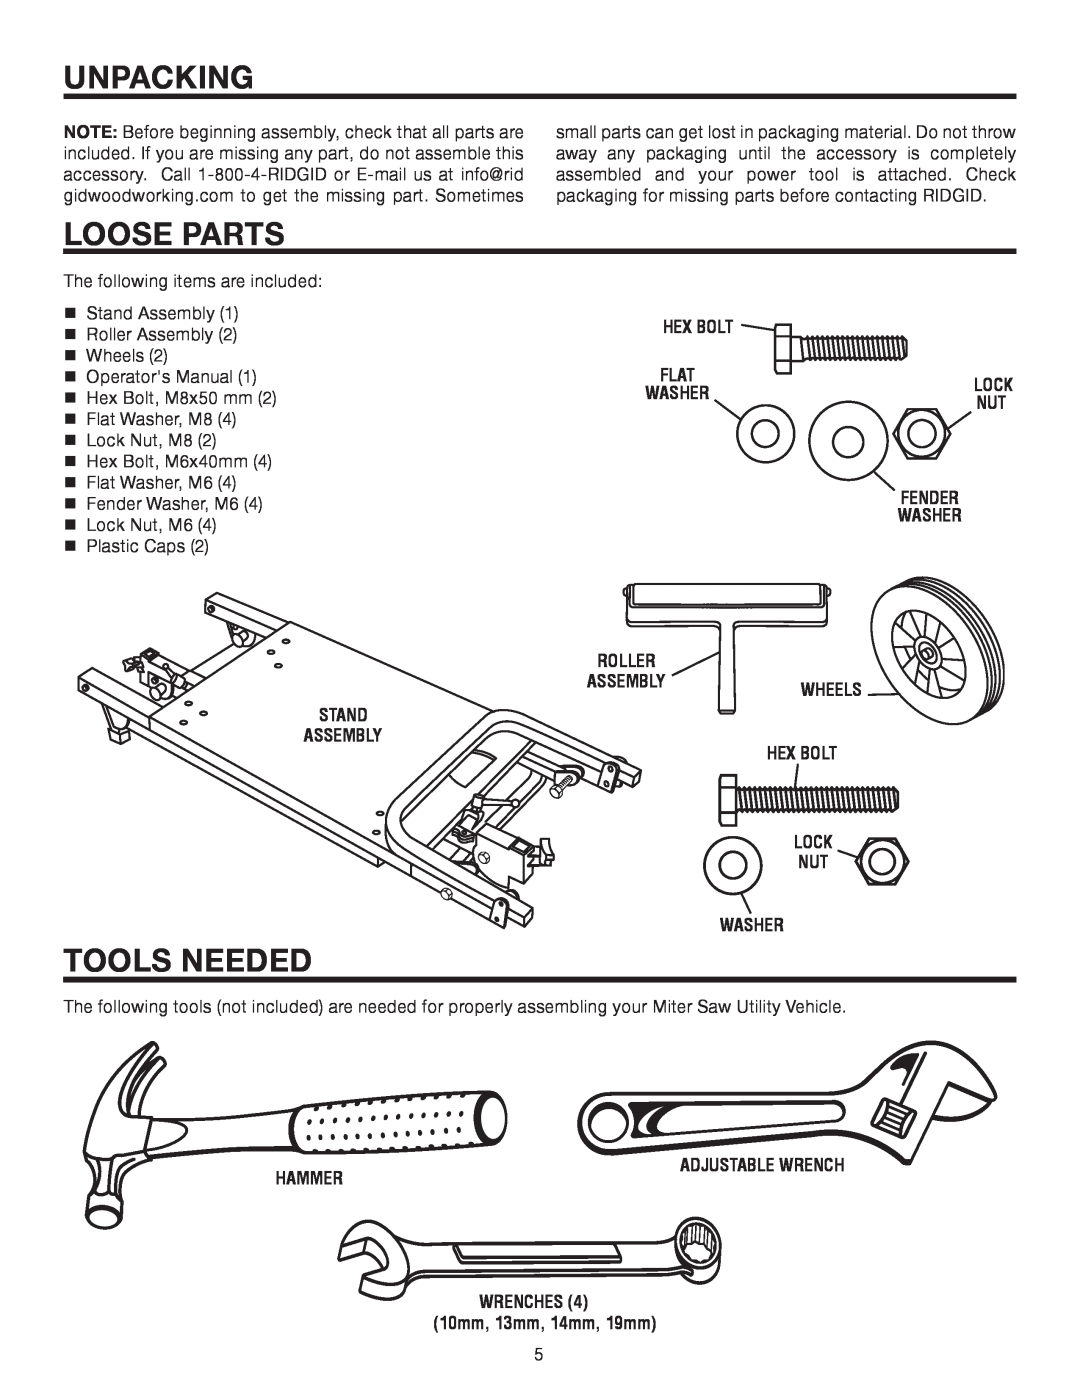 RIDGID AC99402 manual Unpacking, Loose Parts, Tools Needed, Stand Assembly, Hex Bolt, Washer, Hammer, Adjustable Wrench 